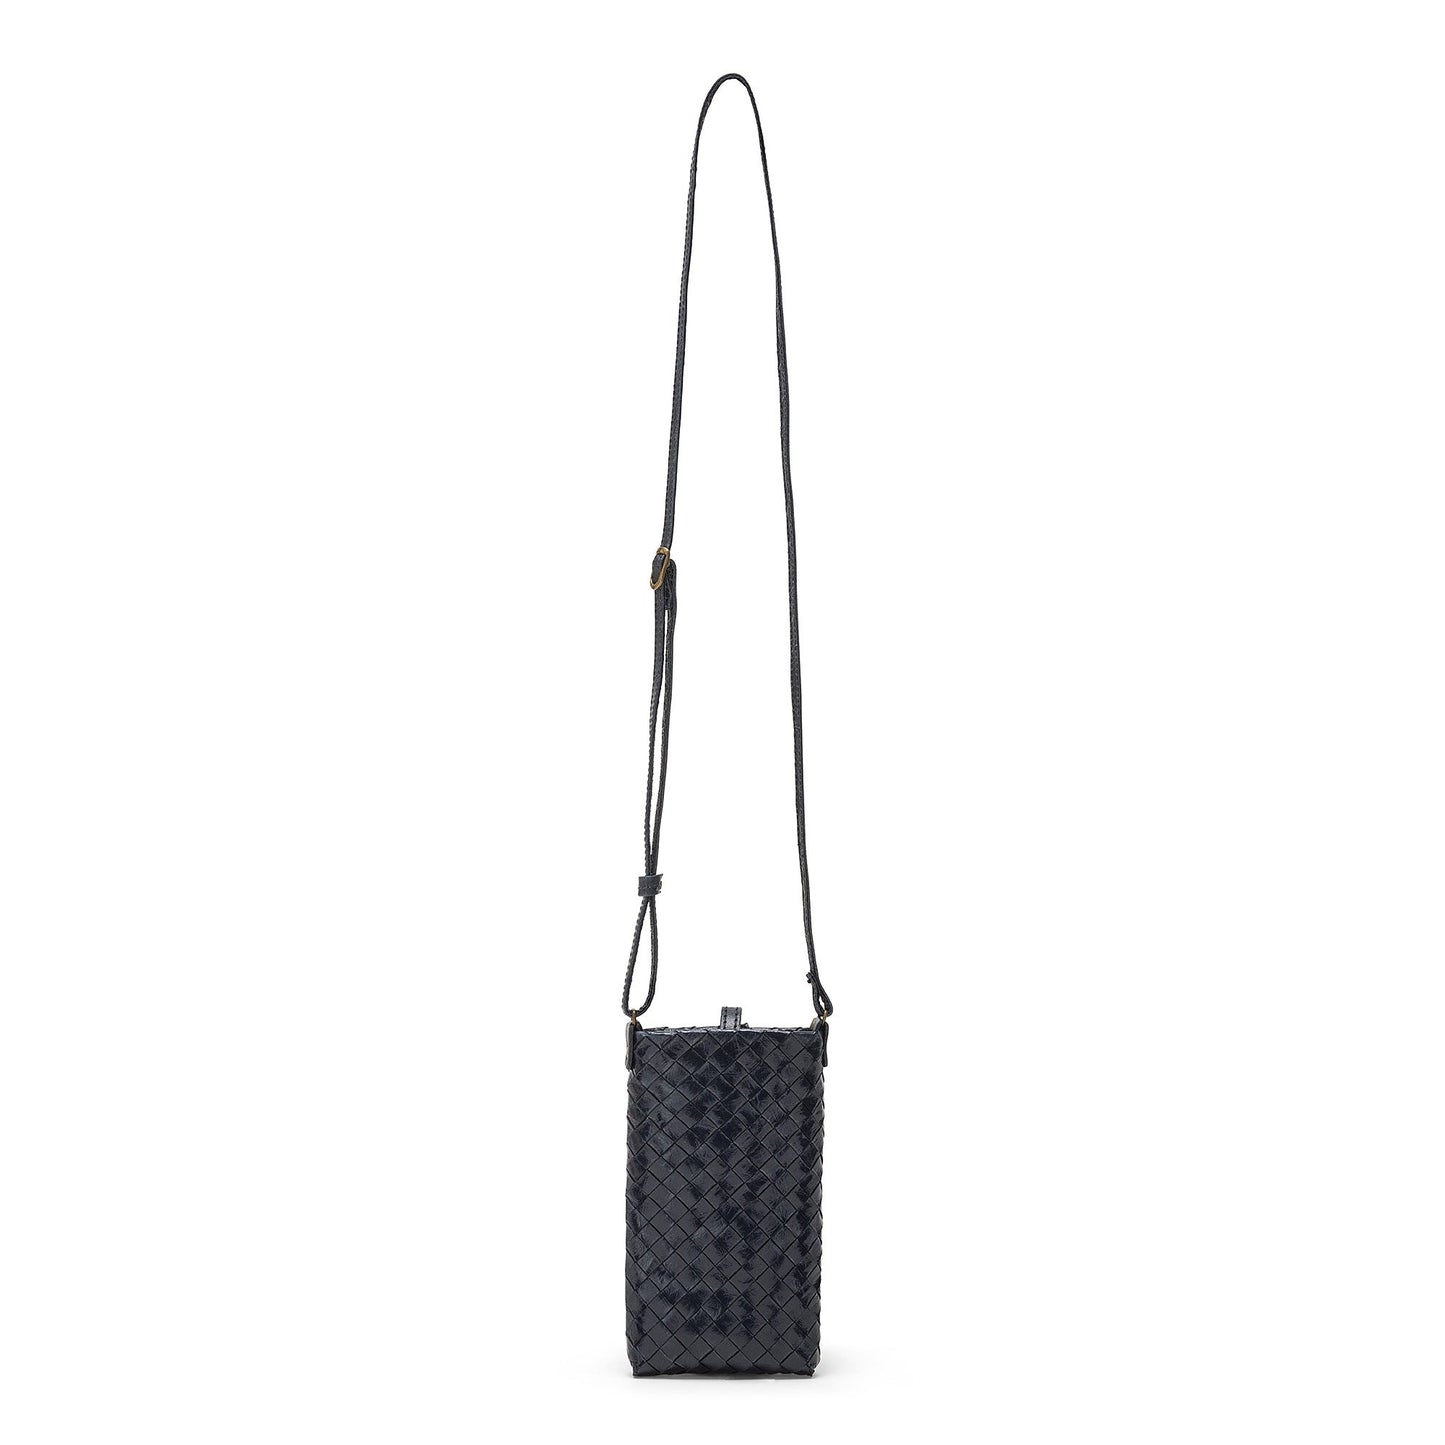 A dark blue woven washable paper rectangular phone case with a long shoulder strap.